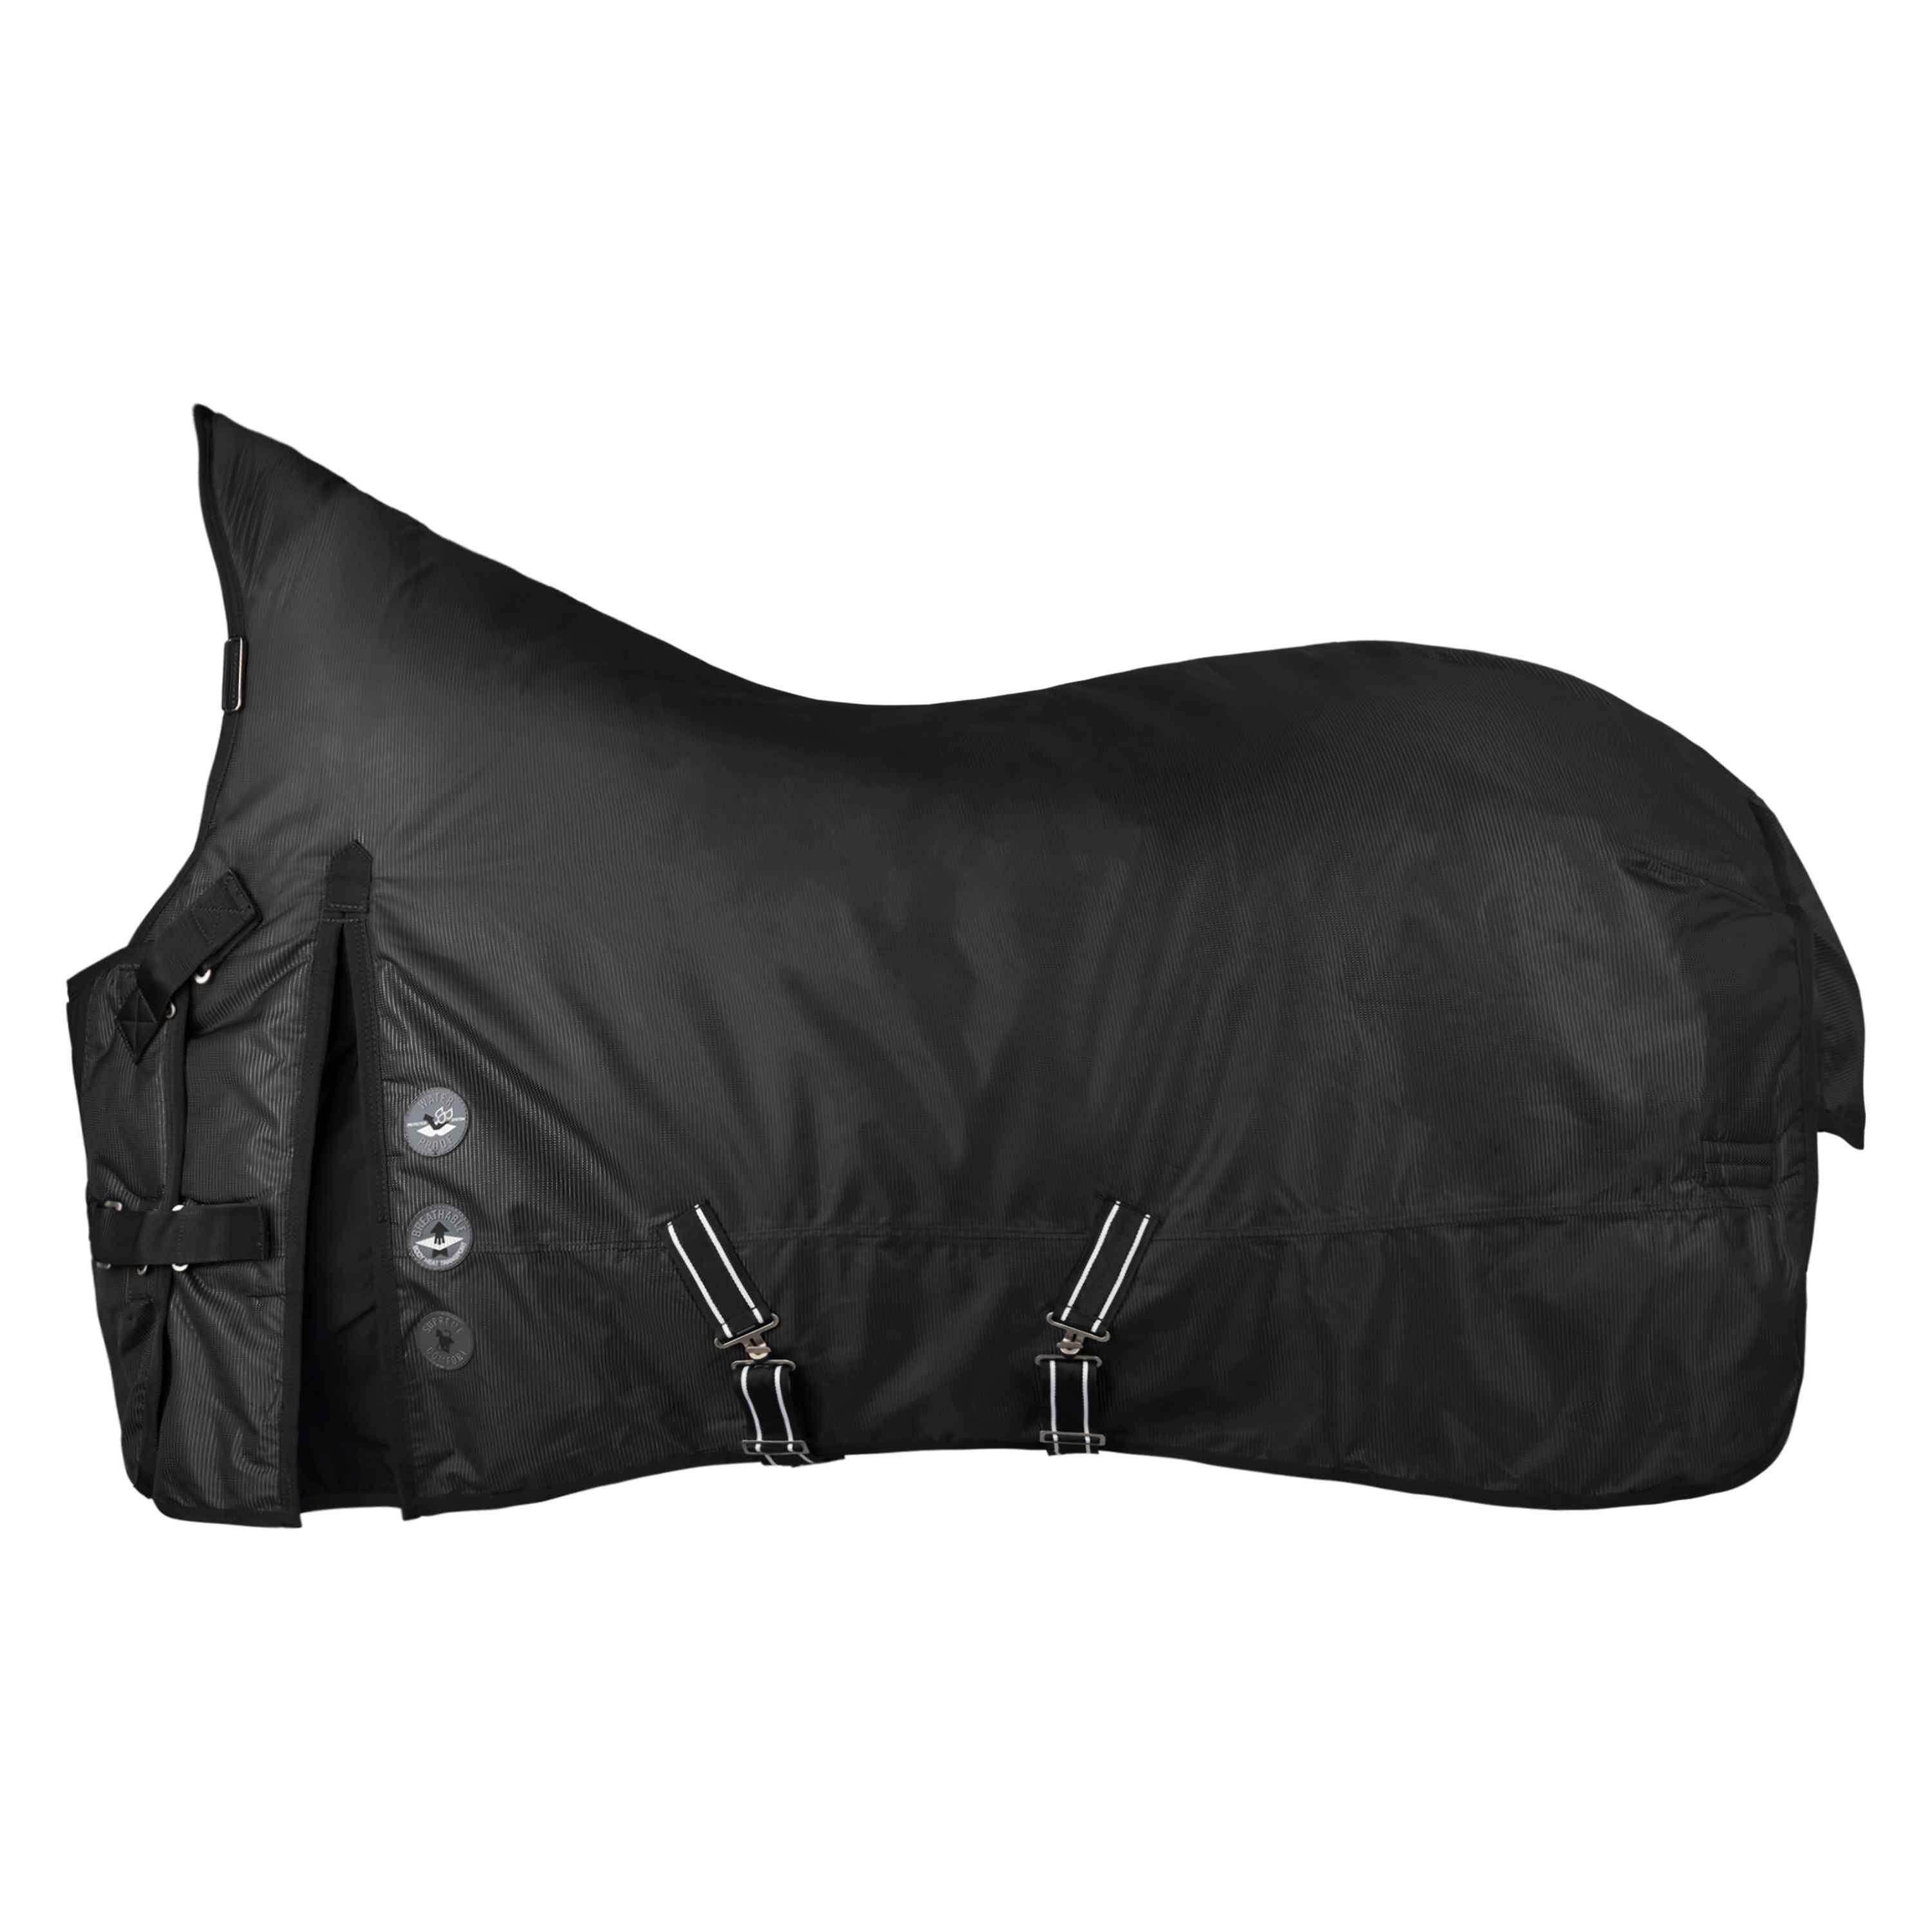 Imperial Riding | 100g Outdoordecke Move | 205 cm | Black